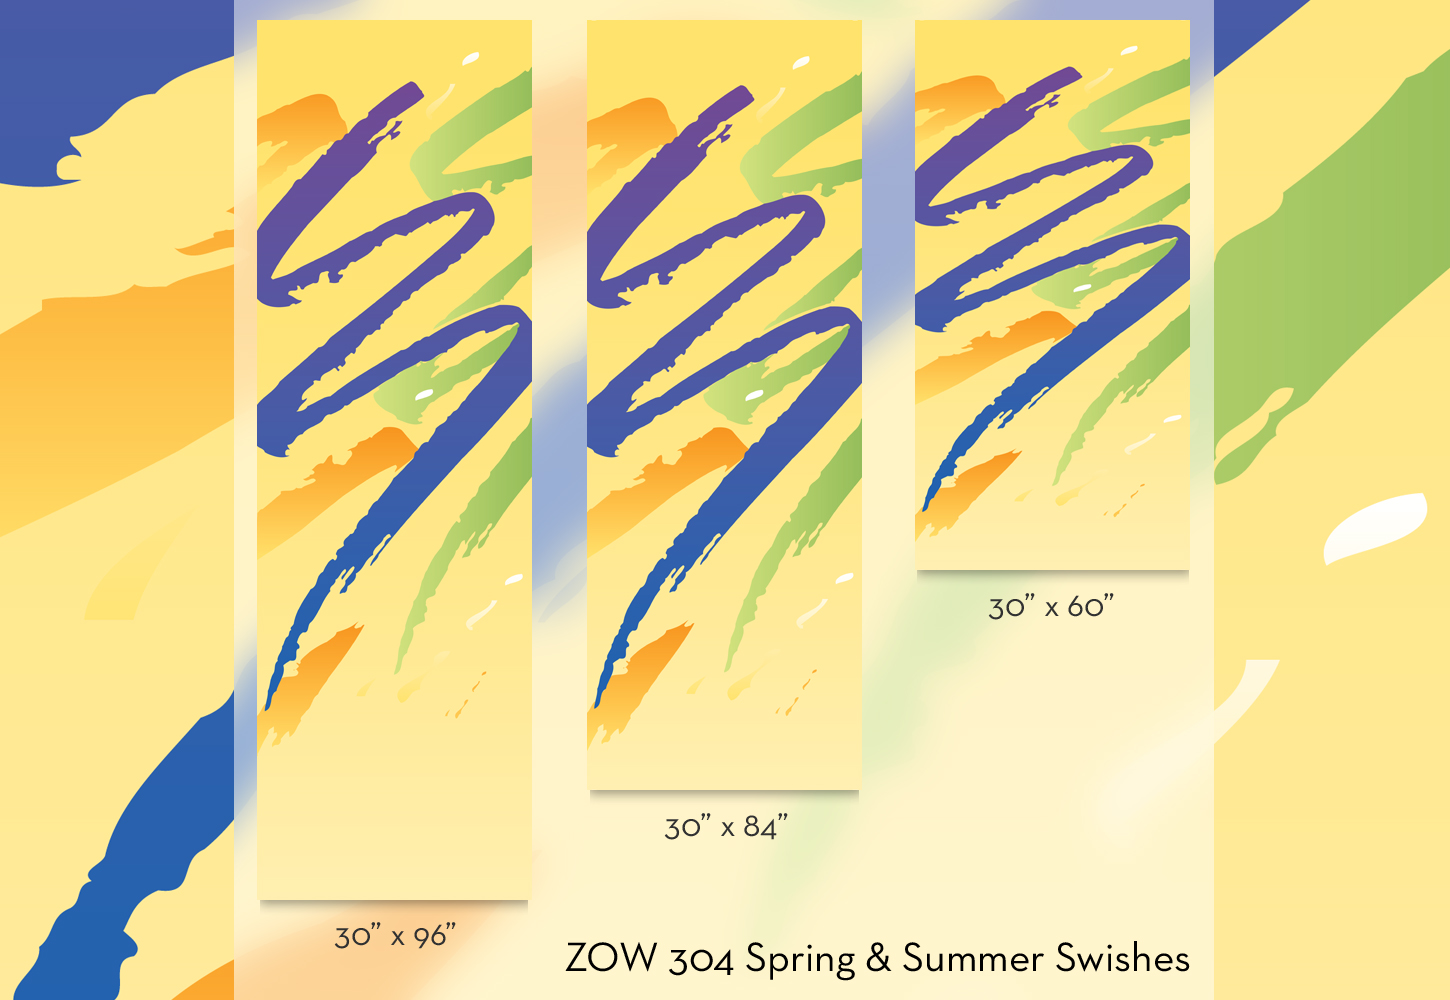 ZOW 304 Spring & Summer Swishes